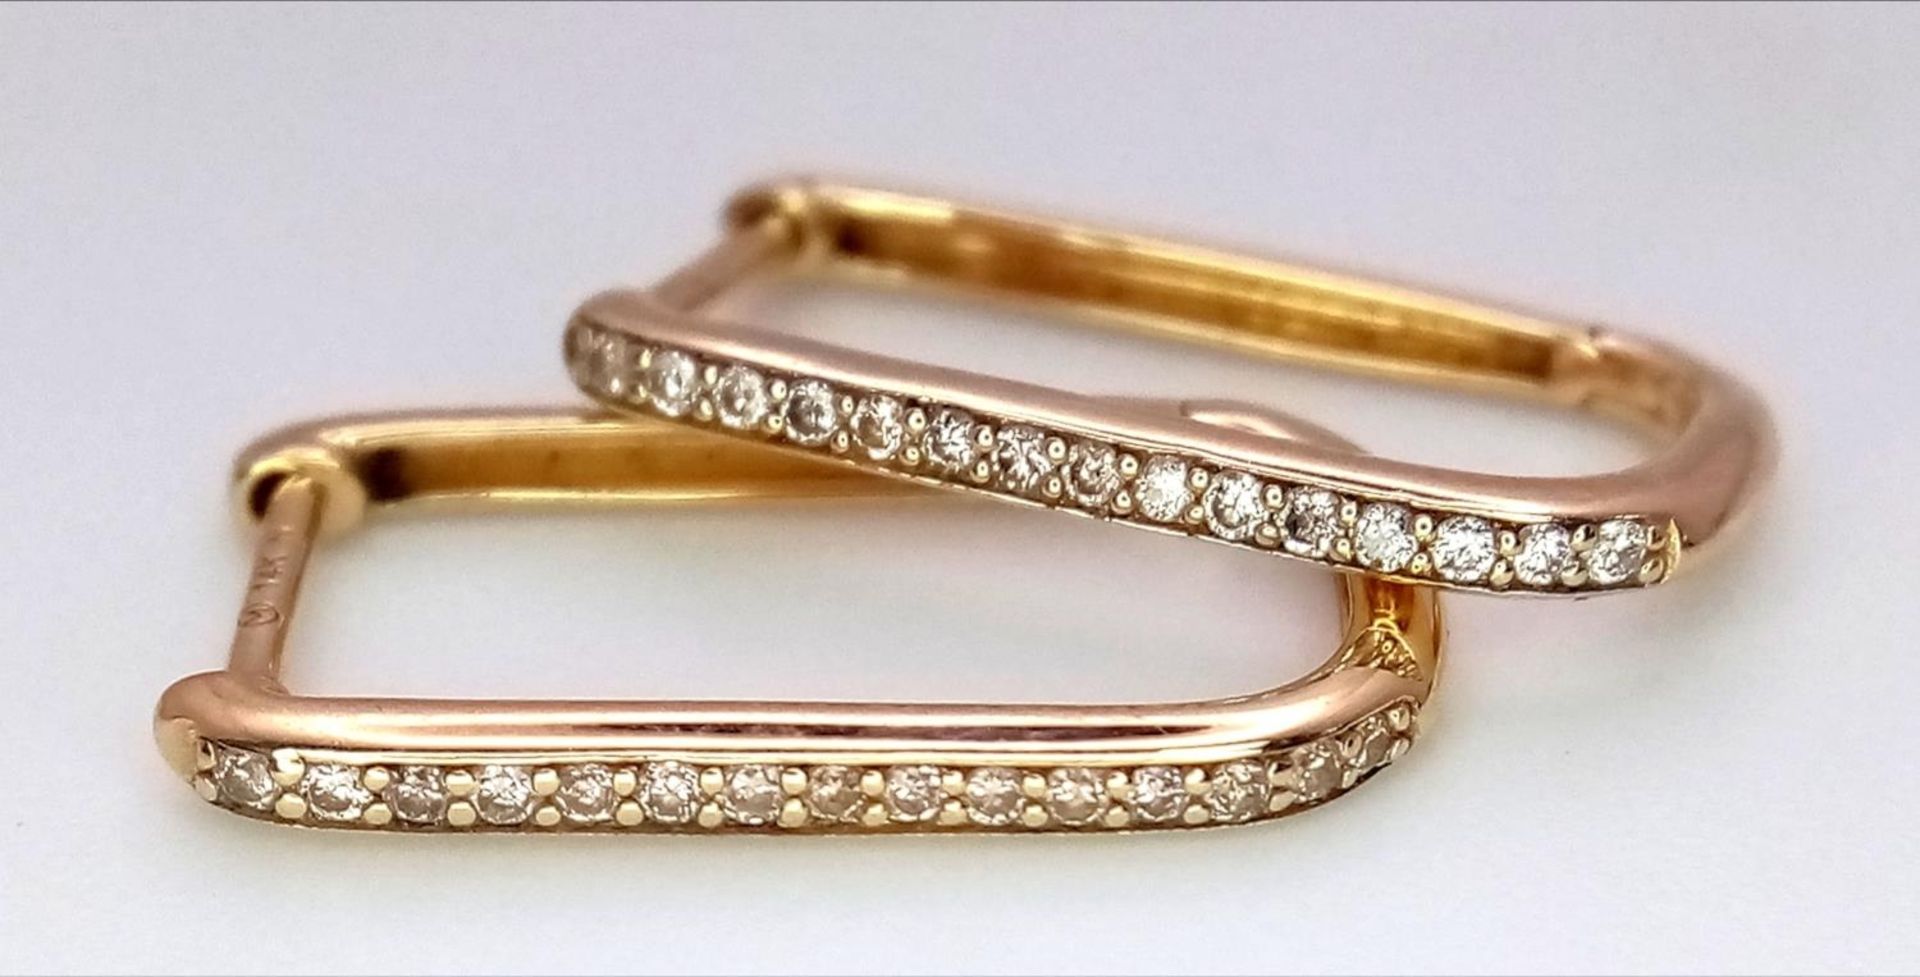 A Pair of 14K Yellow Gold and Diamond Massika Rectangular Earrings. 1.6g total weight.